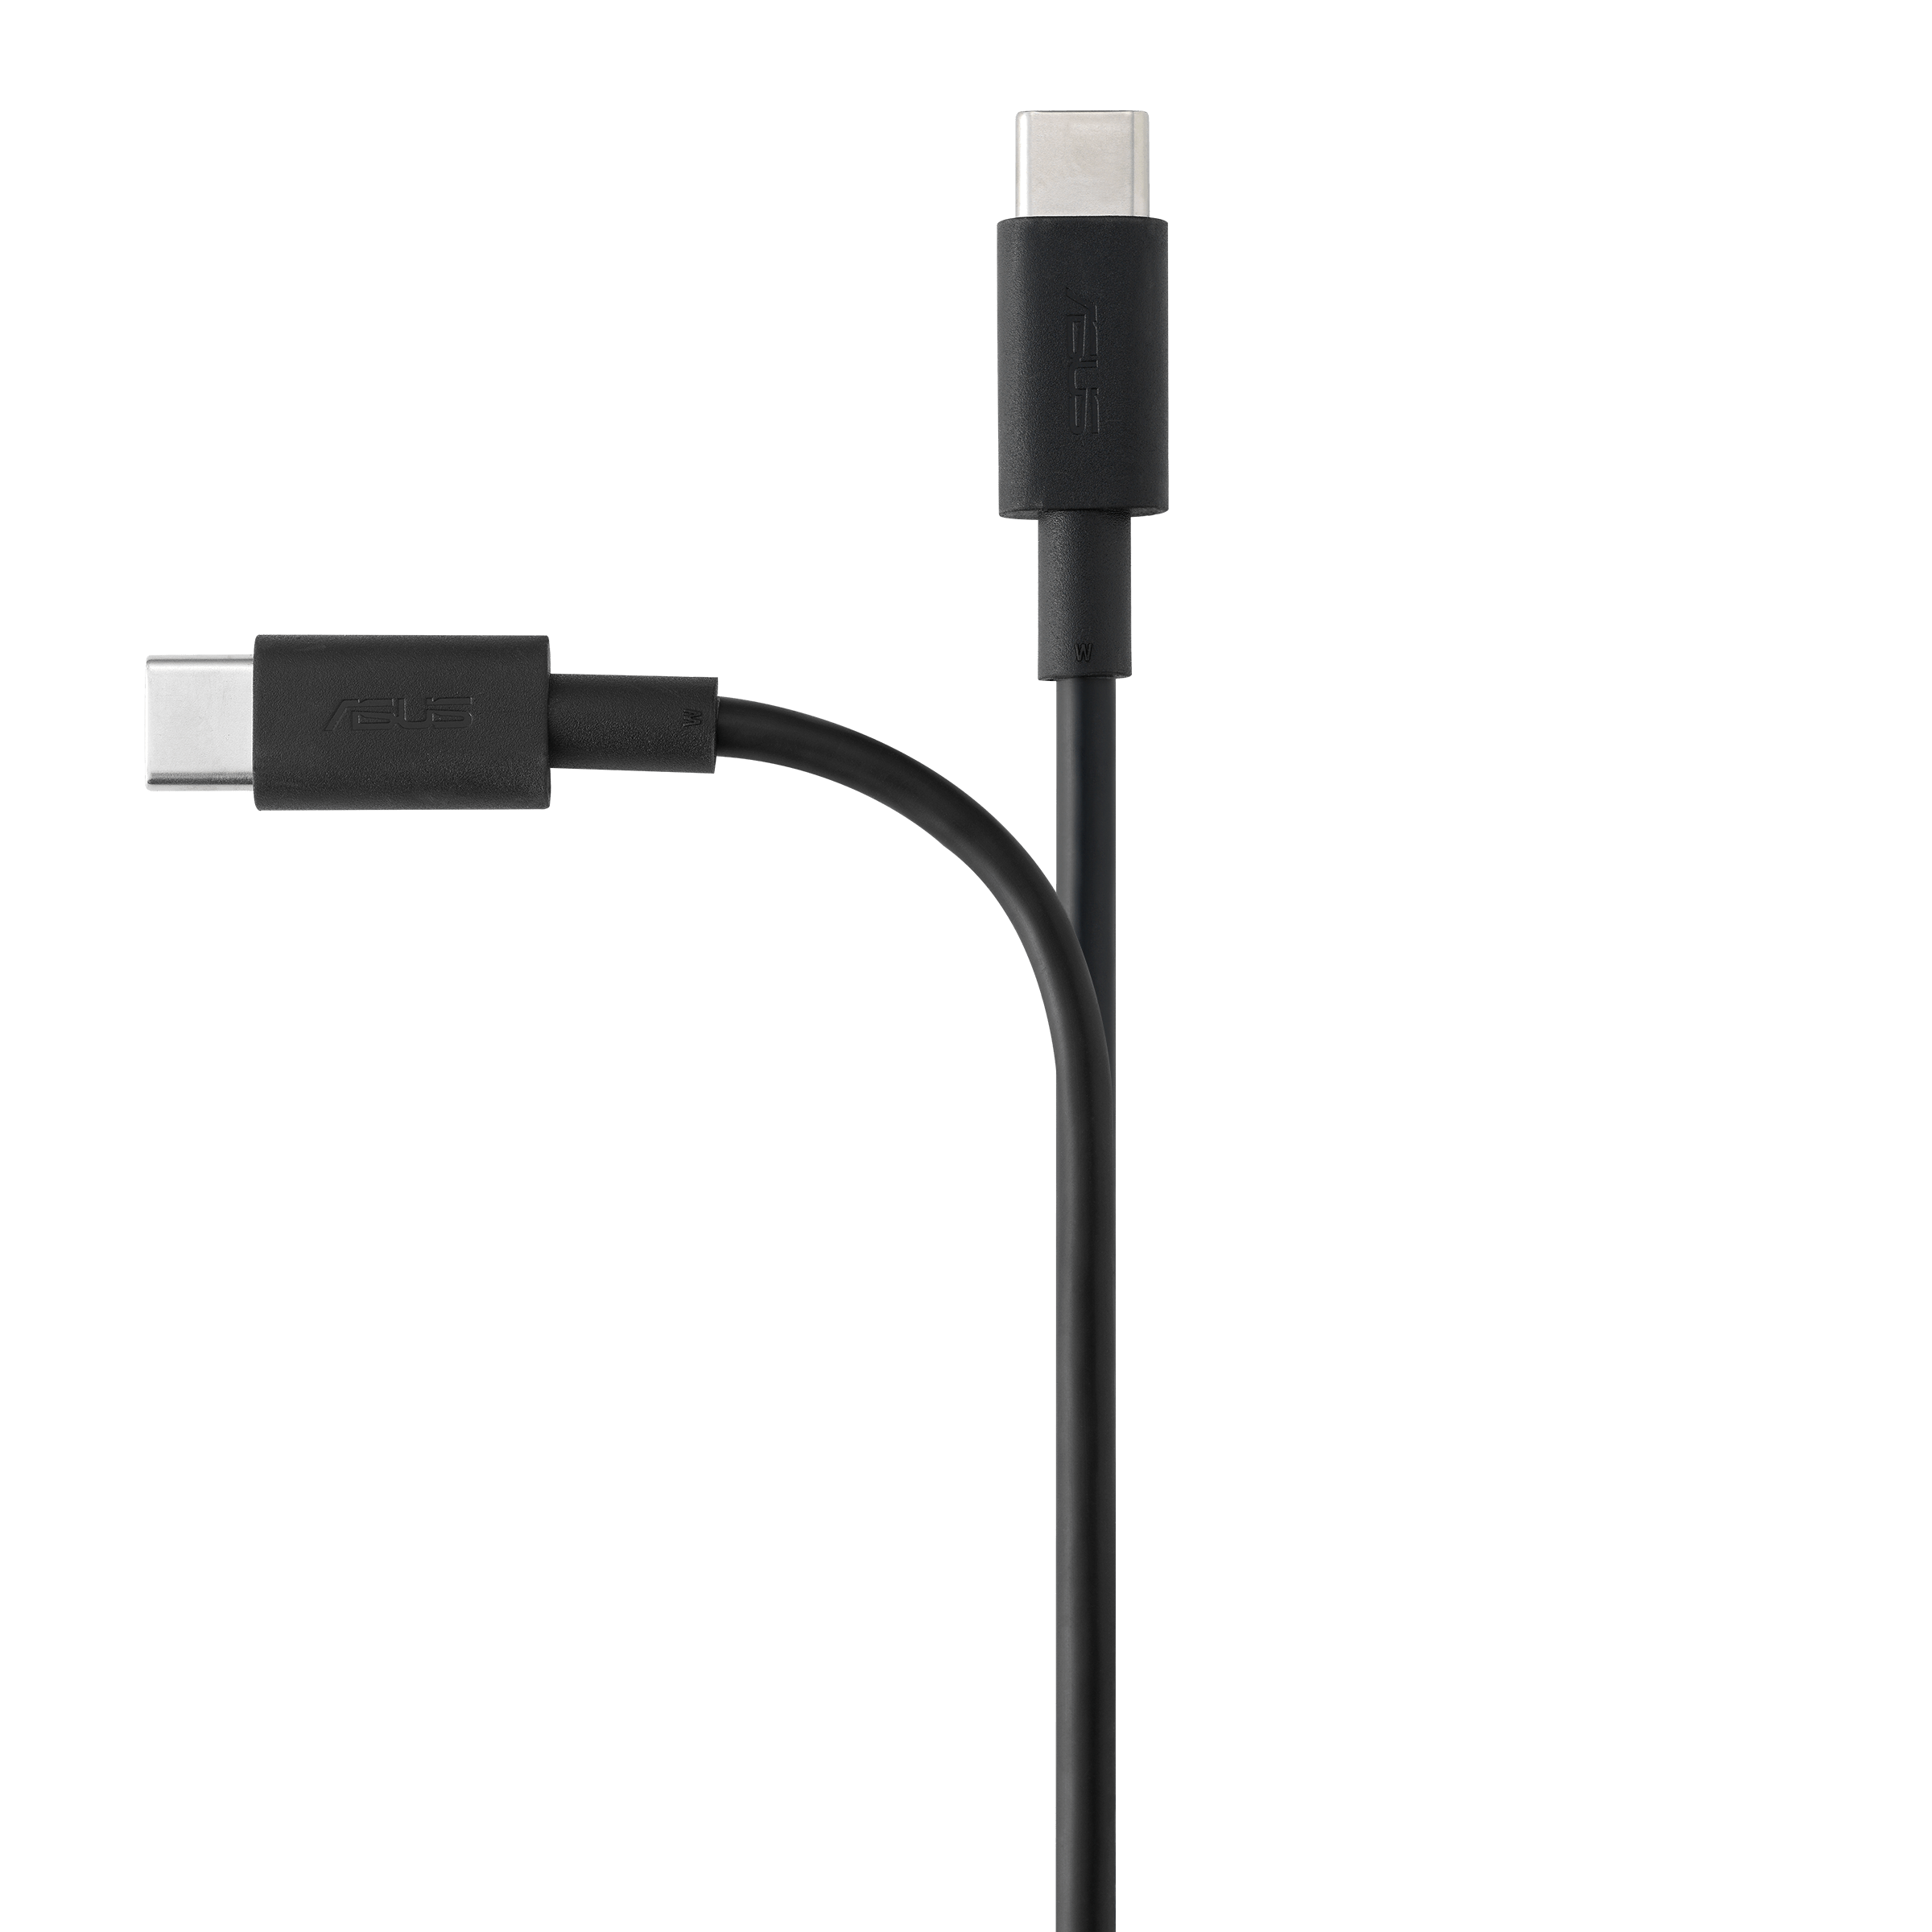 Cable Type C Braided 3ft Charge and Sync Cable for ASUS ZenBook 13 - USB-C to USB-C UX333 - Jet Black 3ft DirectSync PD Cable ASUS ZenBook 13 UX333 100W BoxWave 